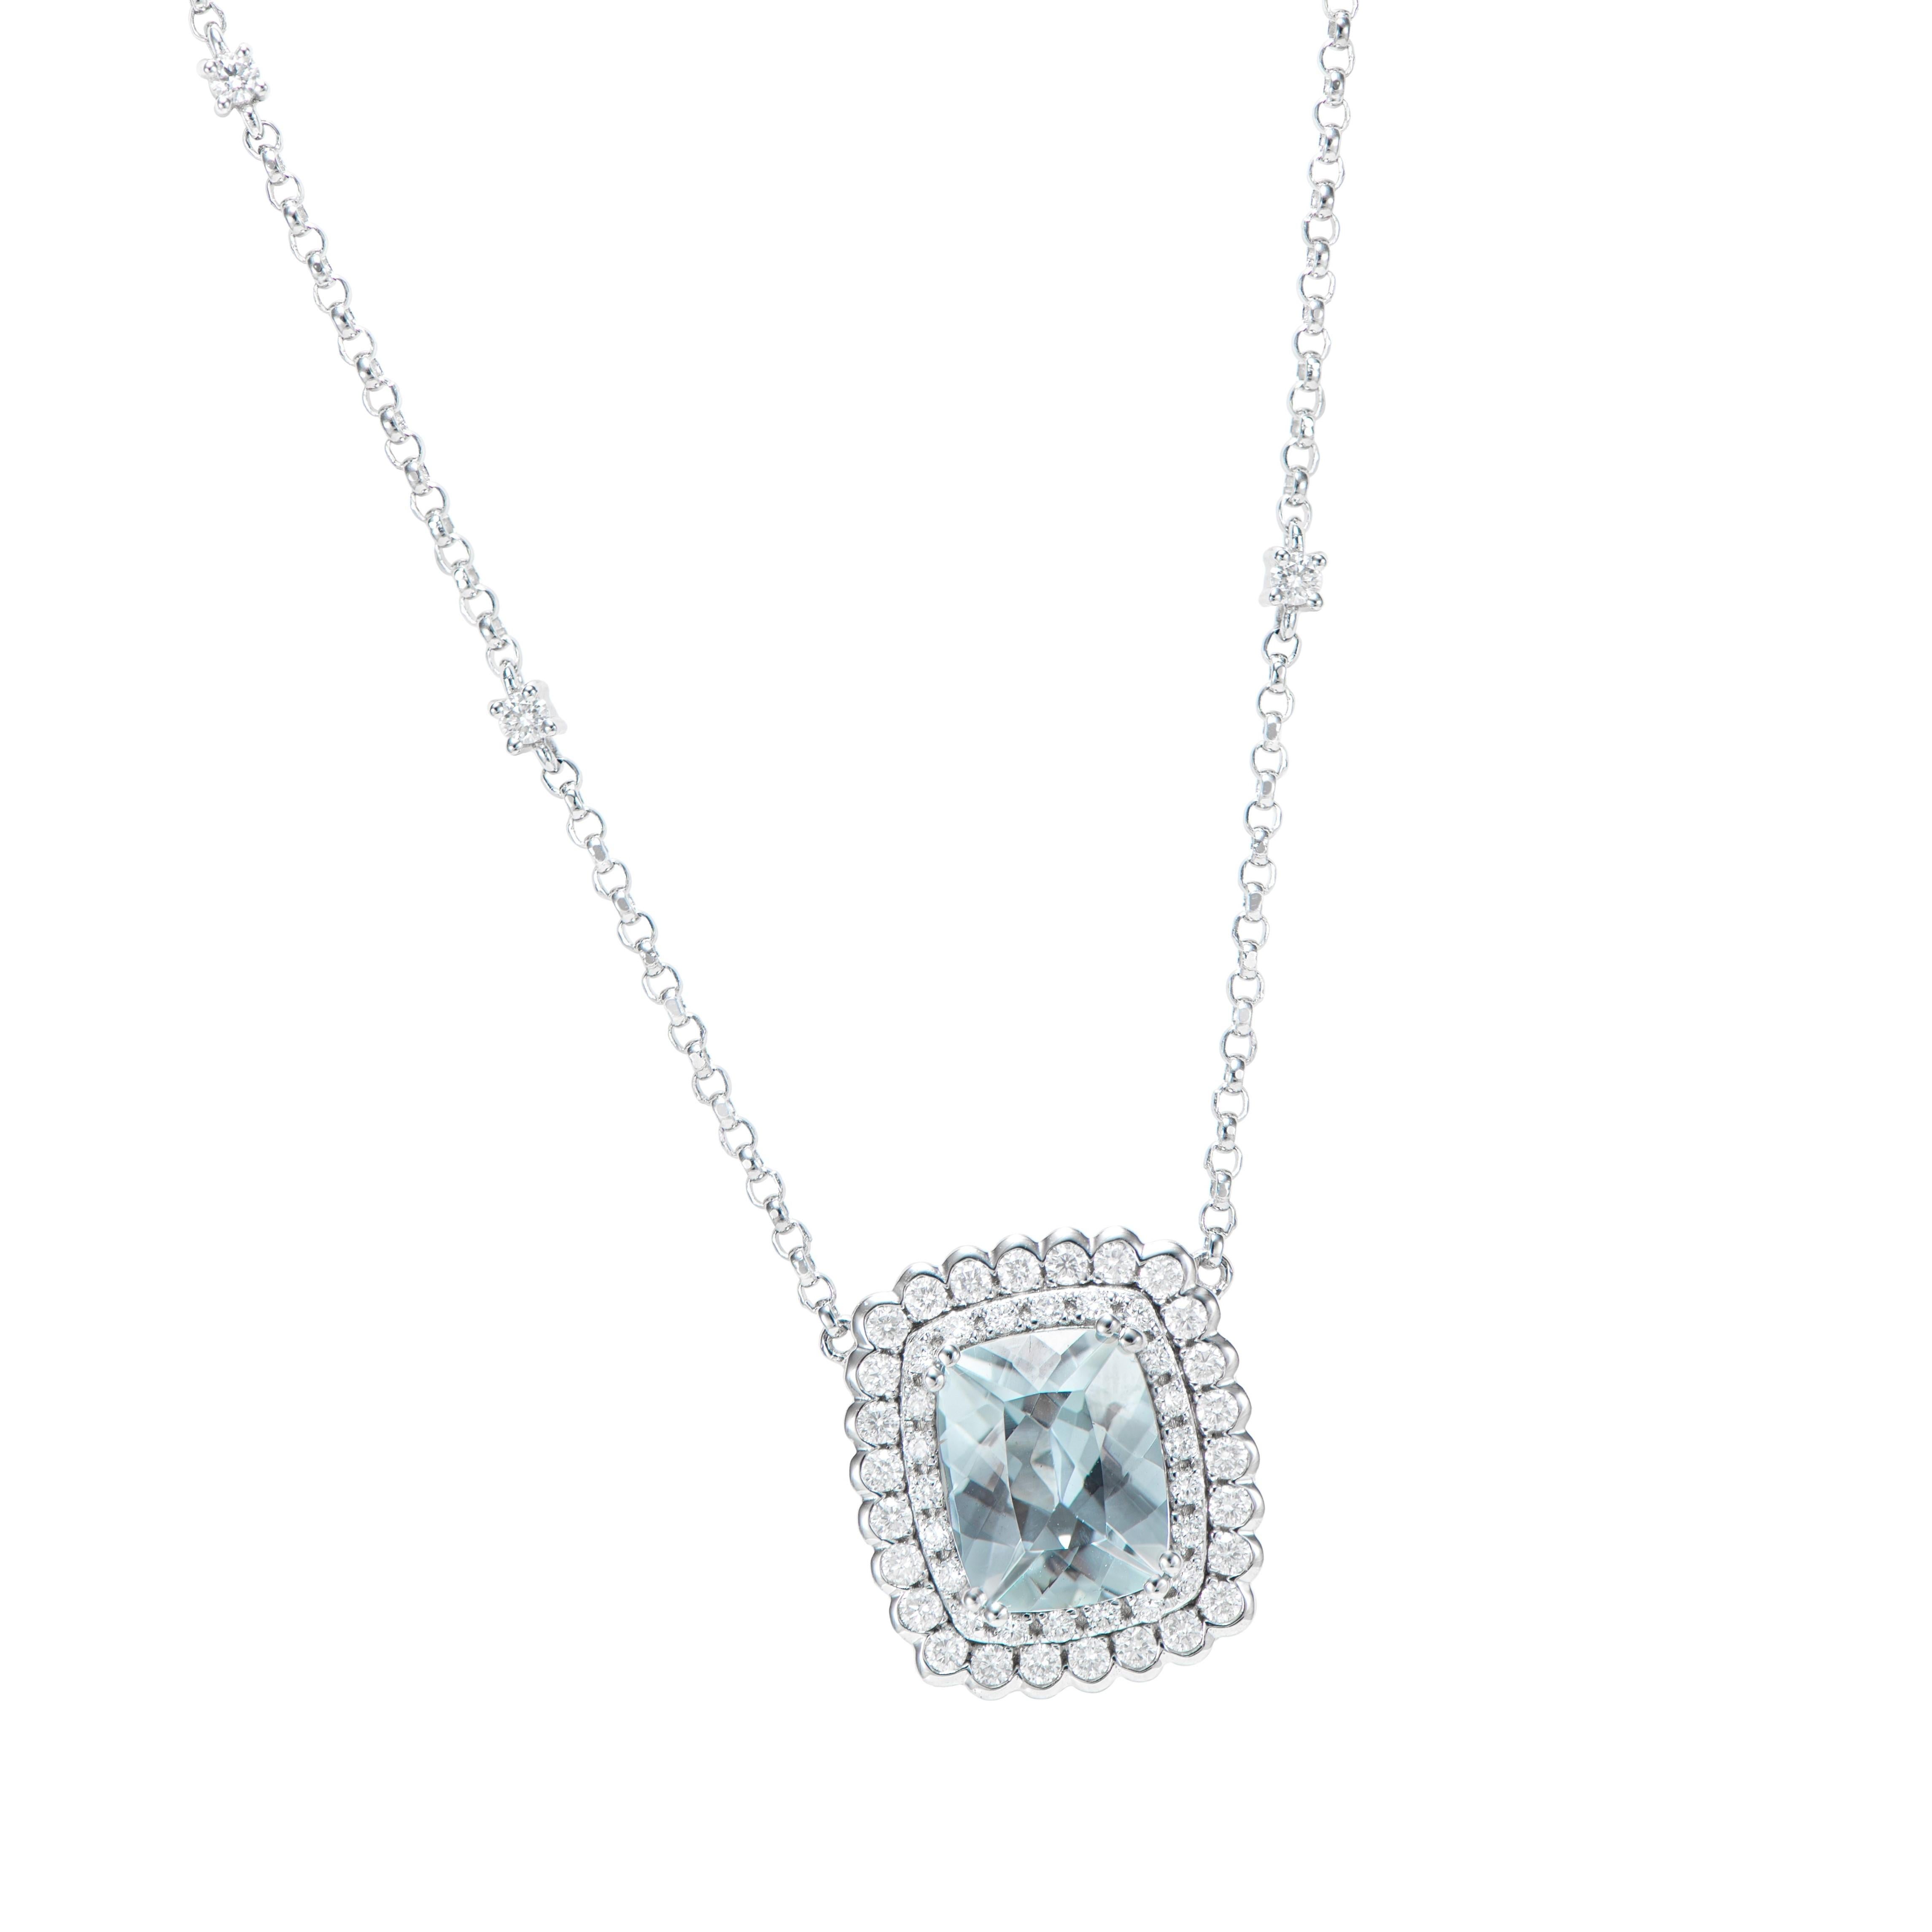 This collection features an array of aquamarines with an icy blue hue that is as cool as it gets! Accented with diamonds these Pendants are made in white gold and present a classic yet elegant look. 

Aquamarine and White Diamond Pendant in 18 Karat